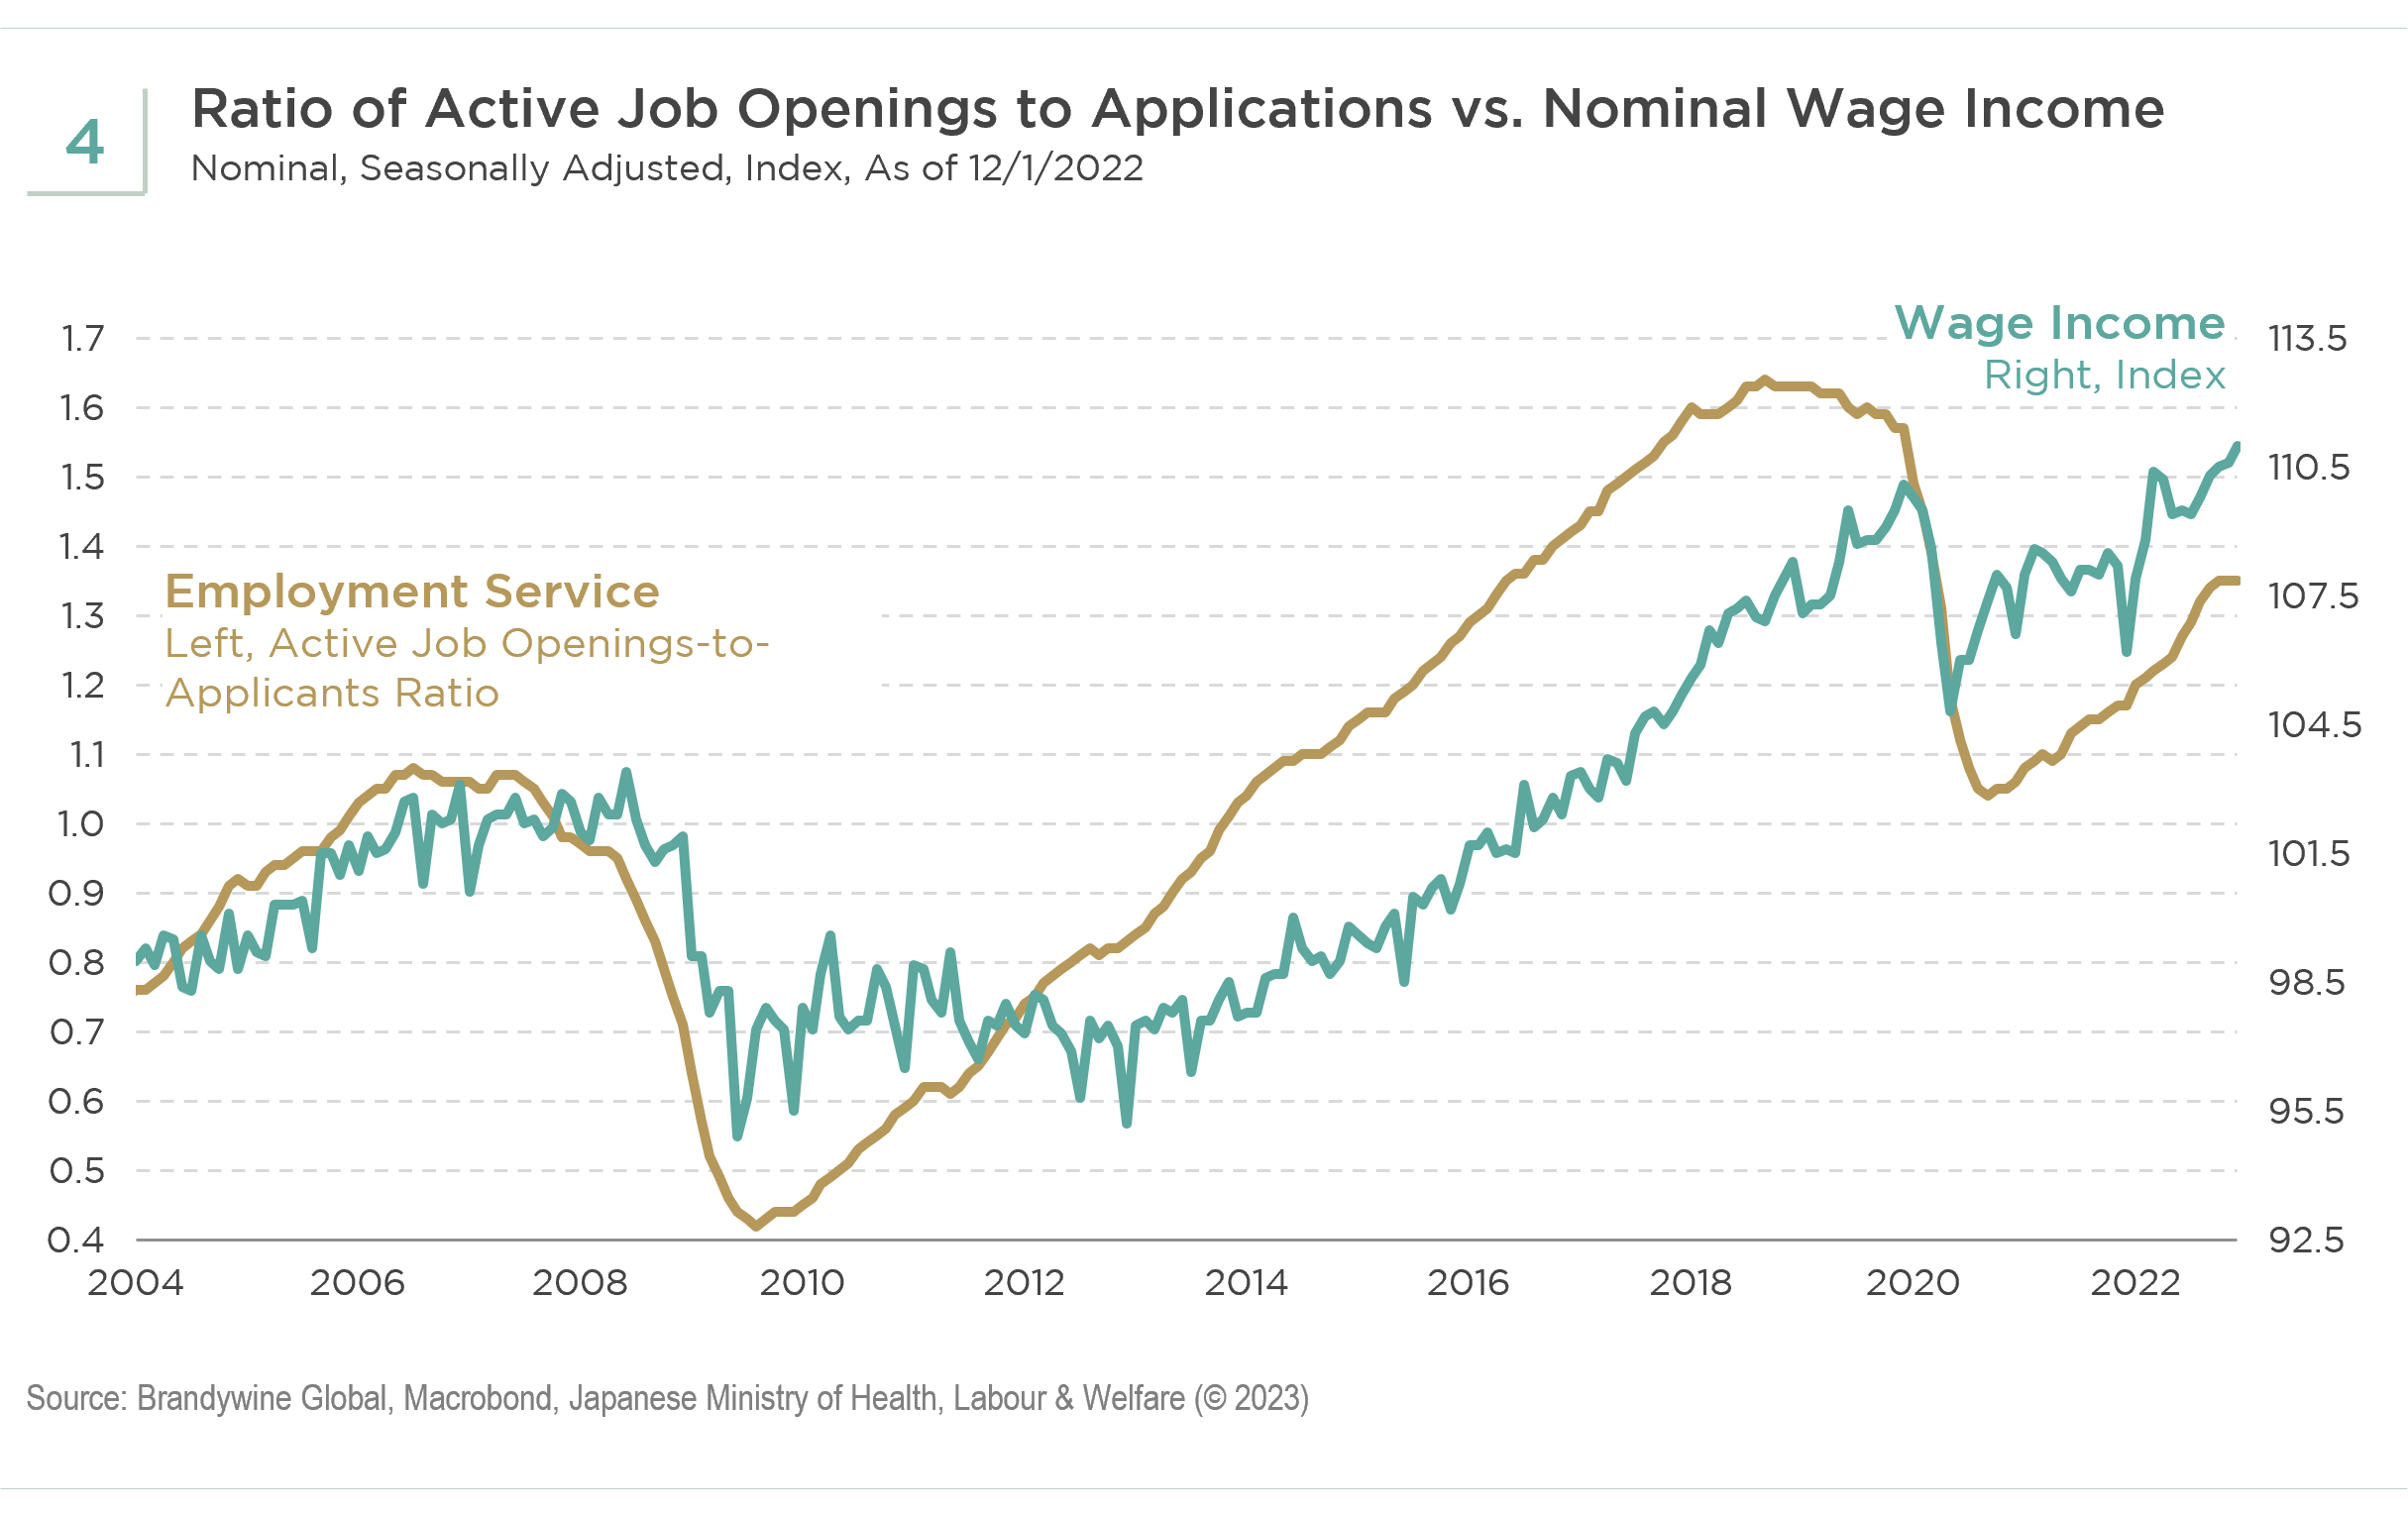 Ratio of Active Job Openings to Applications vs Nominal Wage Income